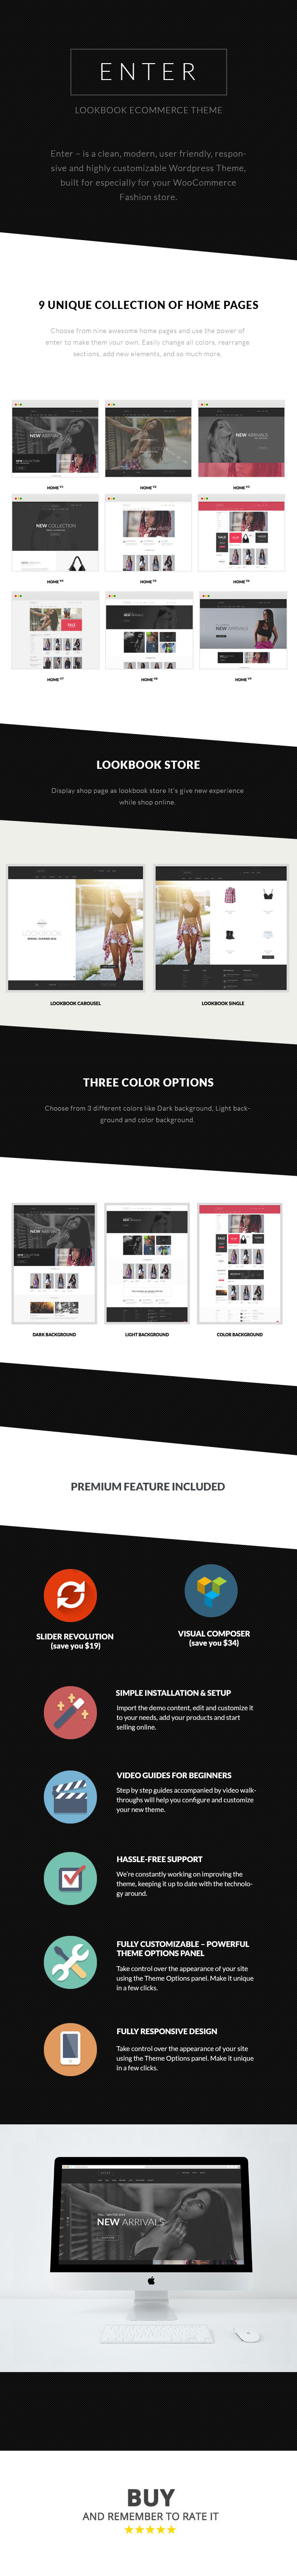 Enter - Fashion & Look Book WooCommerce Theme - 1